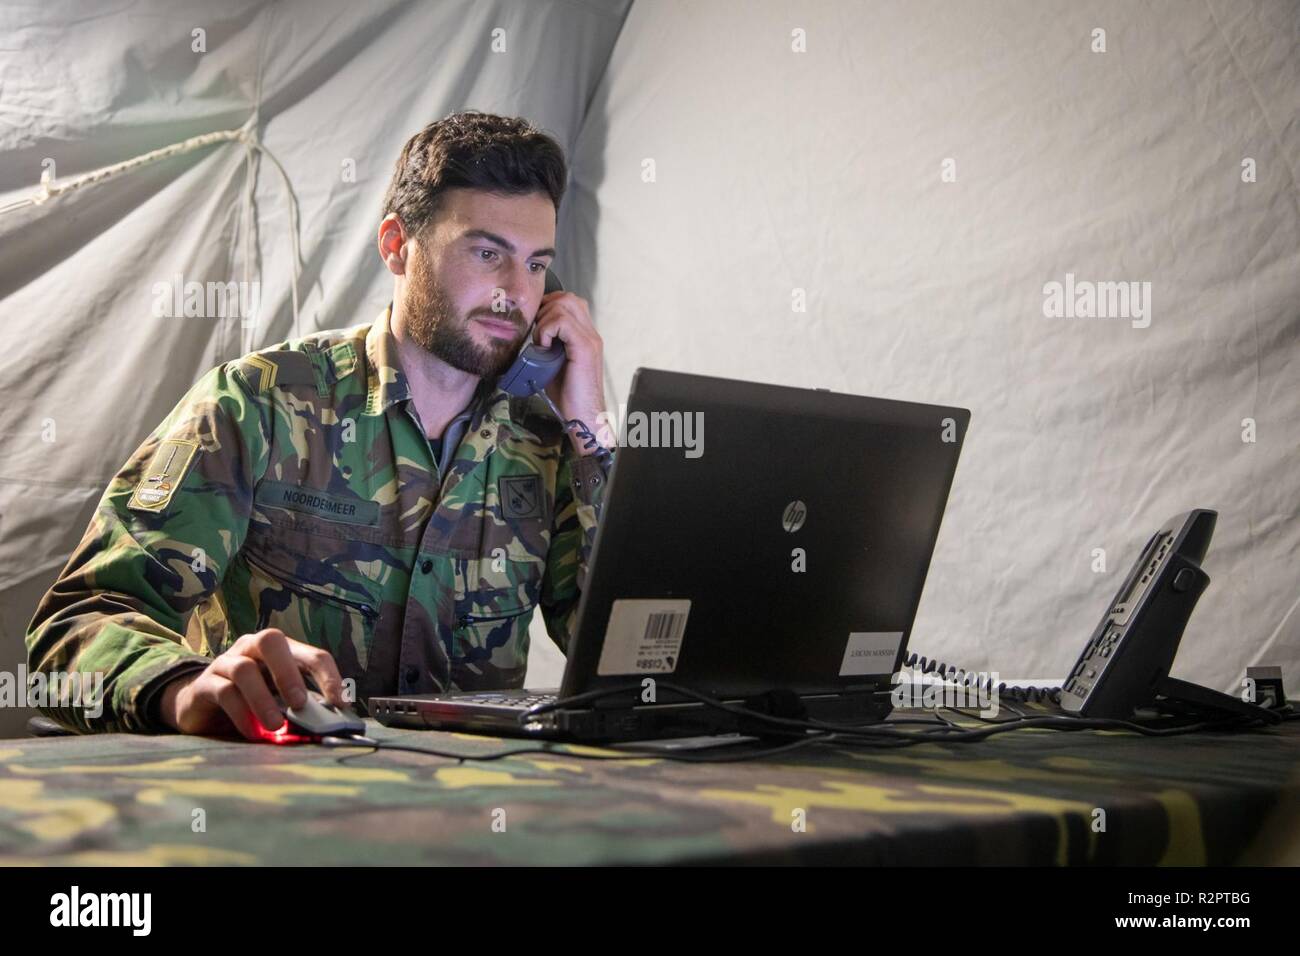 The soldiers in the help desk can assist the Italian soldiers day and night with any CIS requirements. 1 German/Netherlands Corps' Communication and Information Systems Battalion is responsible for the communication between the Headquarters and its brigades. RACE 1 provides the CIS link between 1GNC as LCC and the Italian Ariete Brigade for Exercise Trident Juncture.    With around 50,000 personnel participating in Trident Juncture 2018, it is one of the largest NATO exercises in recent years. Around 250 aircraft, 65 vessels and more than 10,000 vehicles are involved in the exercise in Norway. Stock Photo